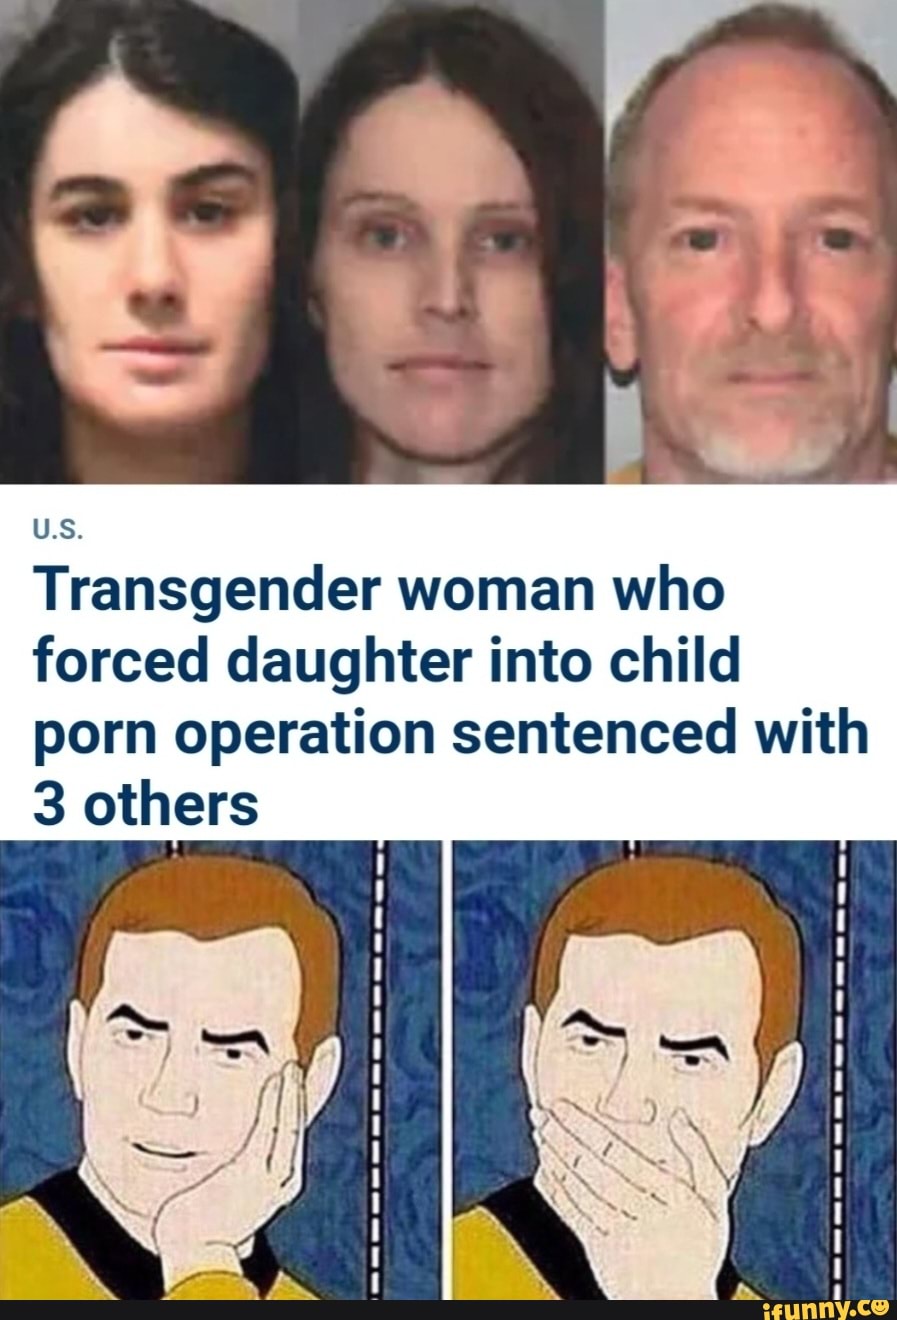 Forced Daughter Porn - U.S. Transgender woman who forced daughter into child porn operation  sentenced with 3 others - iFunny Brazil